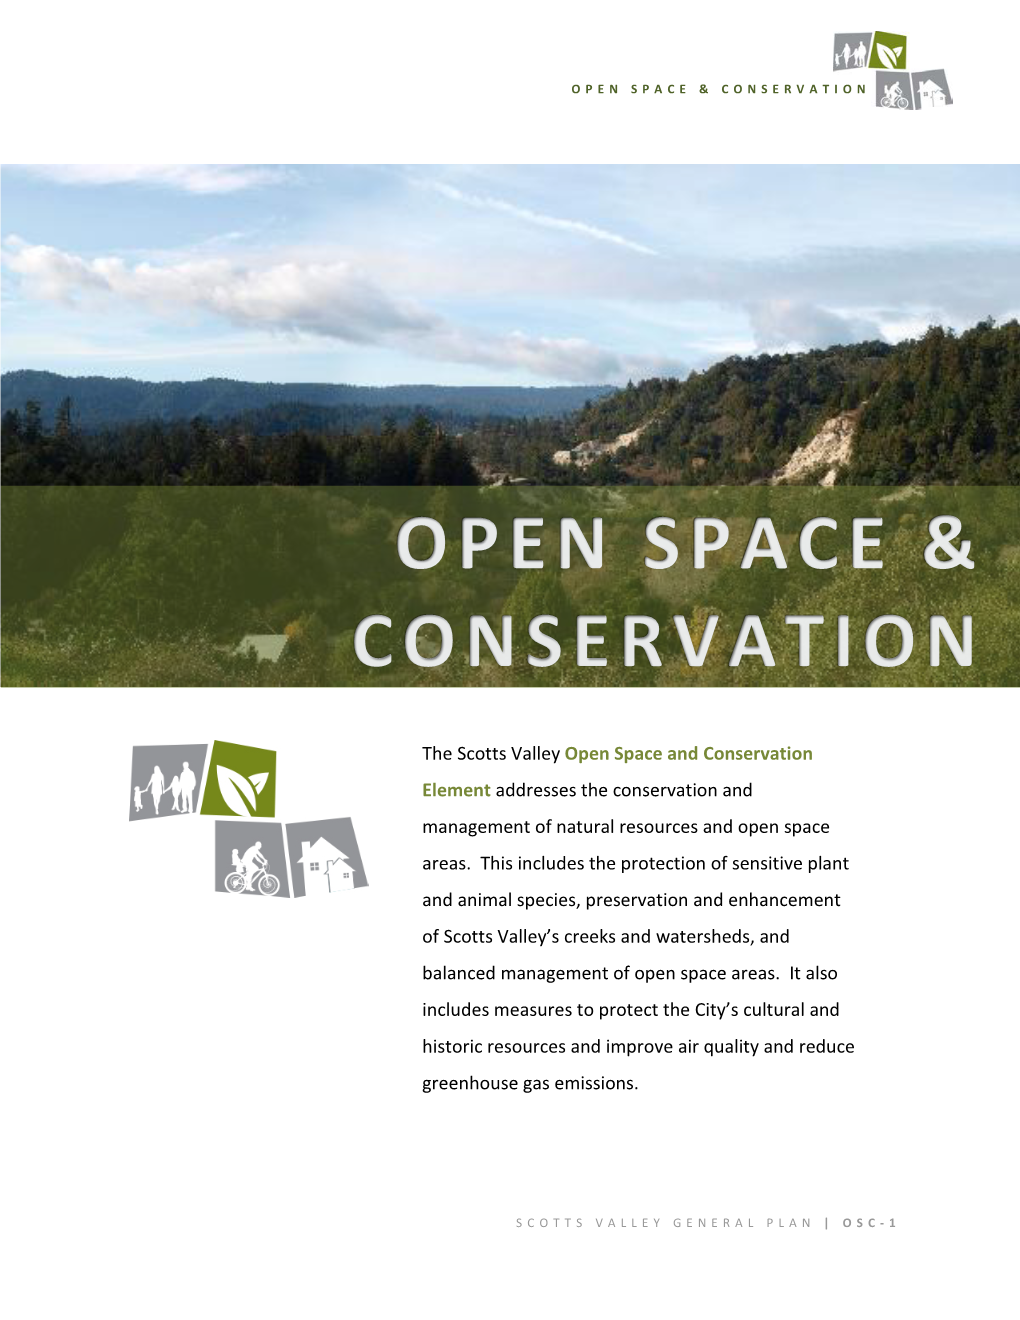 The Scotts Valley Open Space and Conservation Element Addresses the Conservation and Management of Natural Resources and Open Space Areas